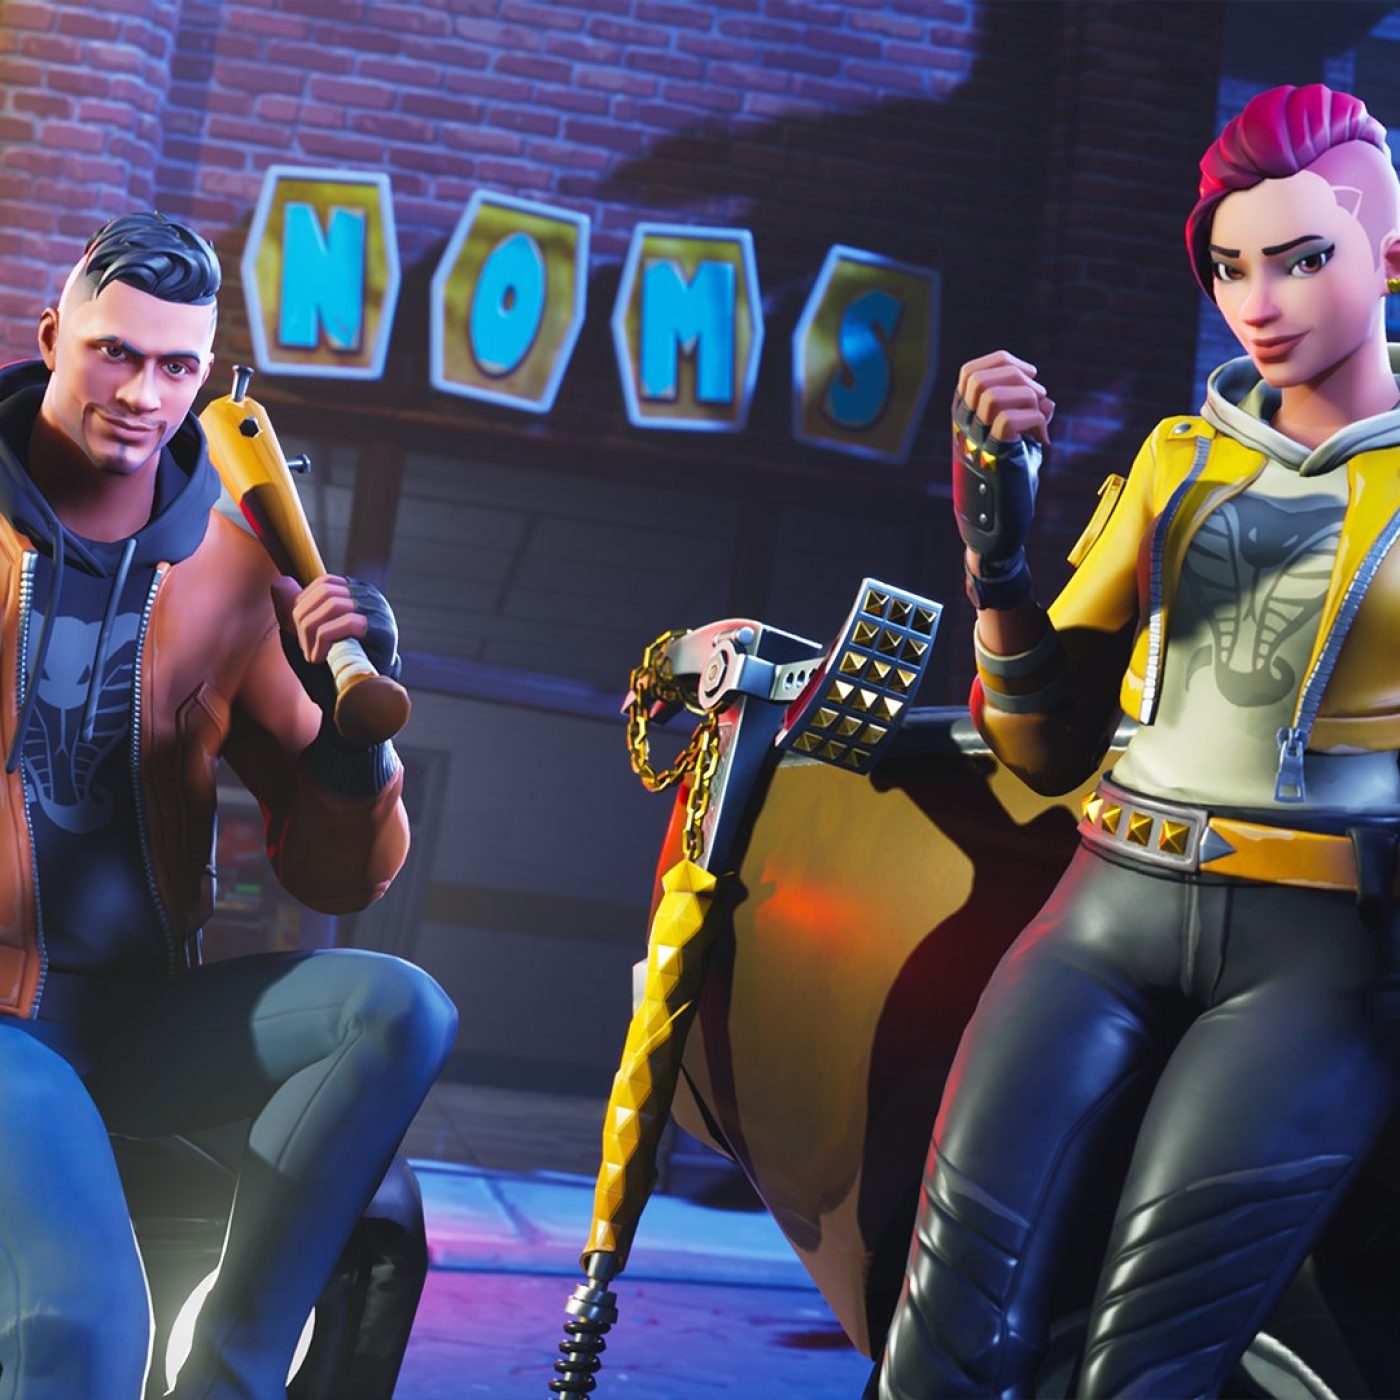 Leaked Fortnite for Android APK hints at Galaxy Apps Store